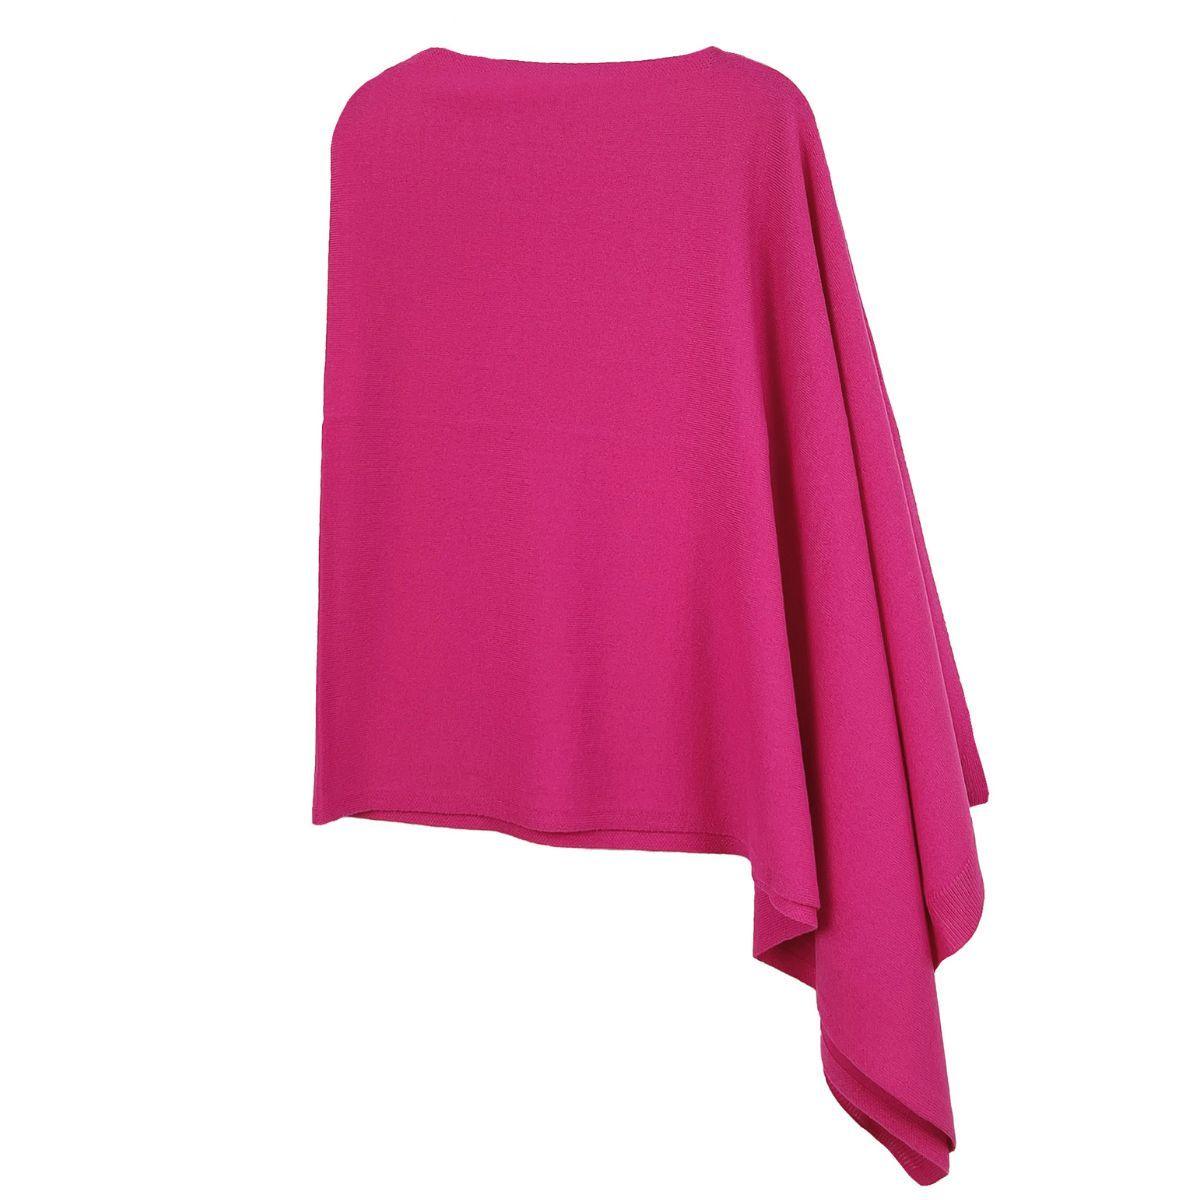 Upgrade your wardrobe with our Chic Pink Scarf Poncho Wrap